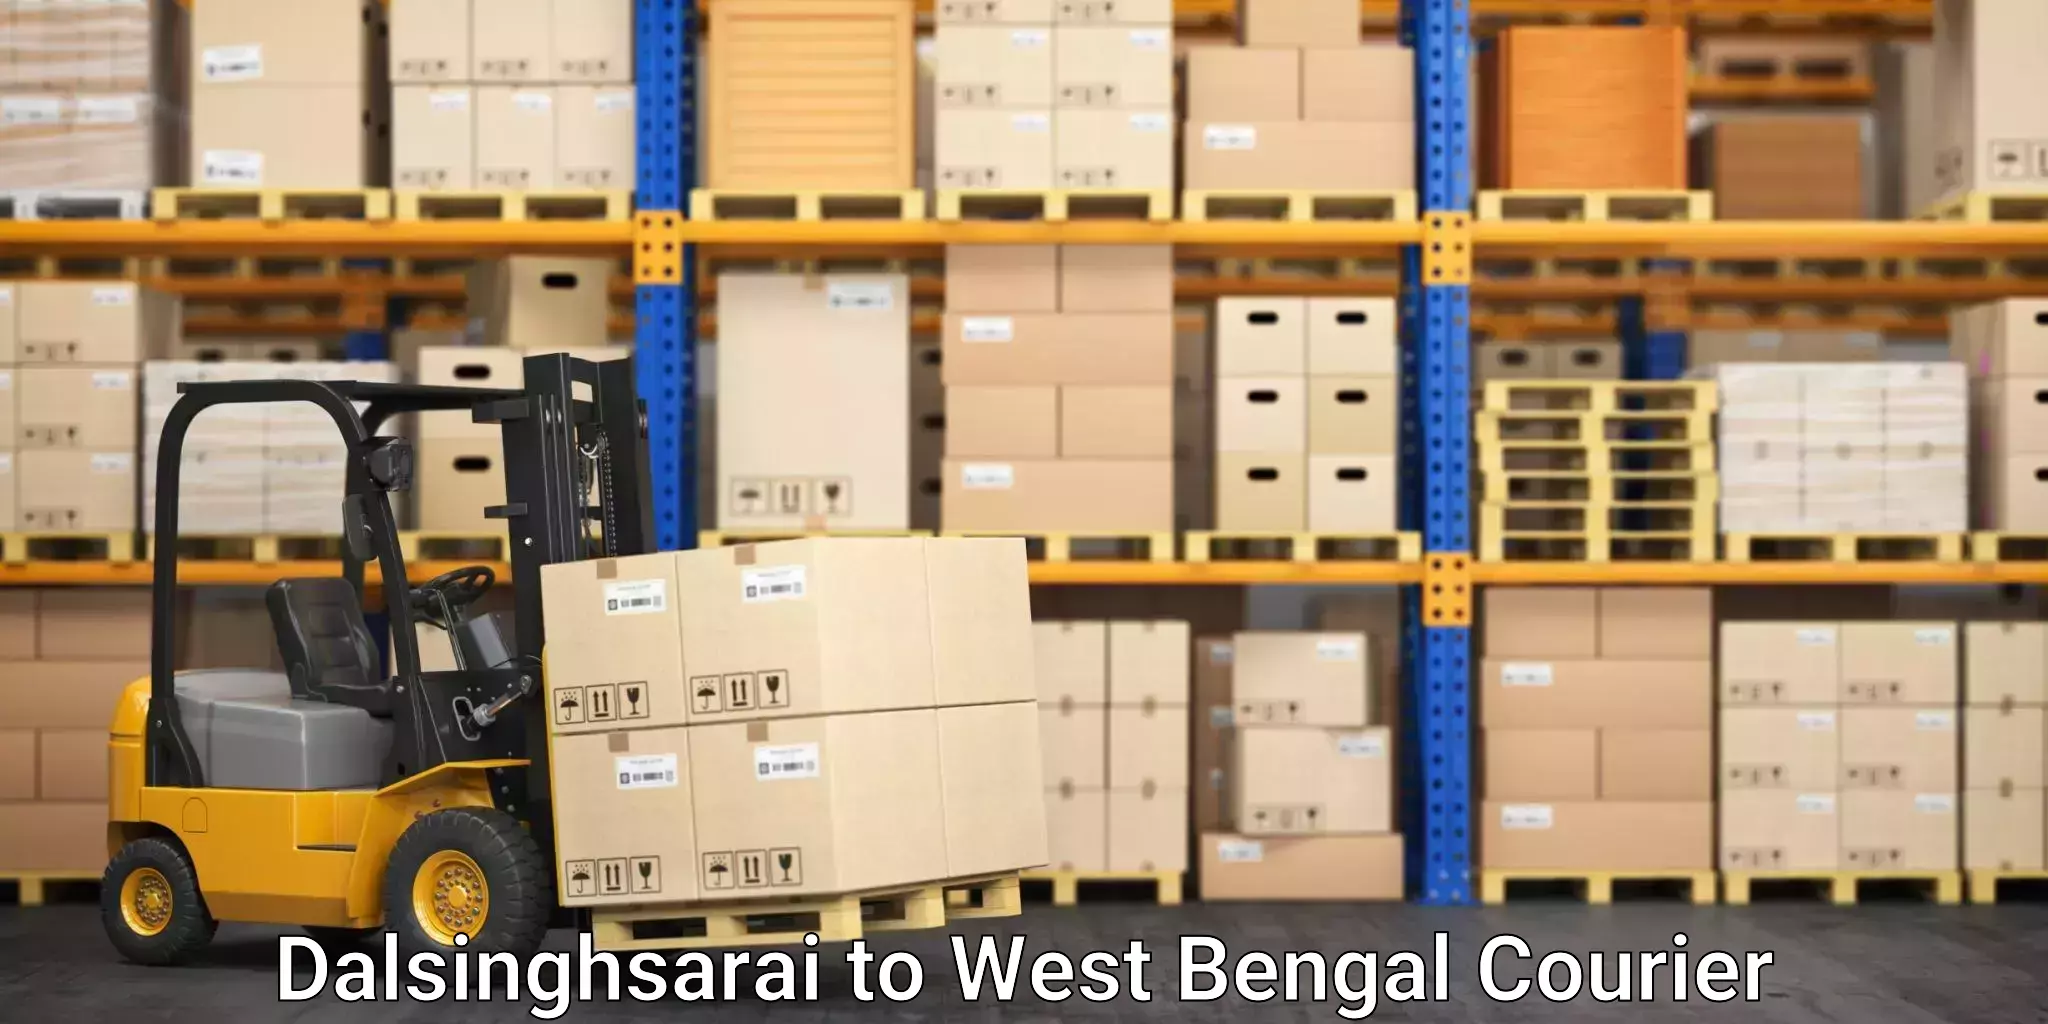 Moving and storage services Dalsinghsarai to Hanskhali